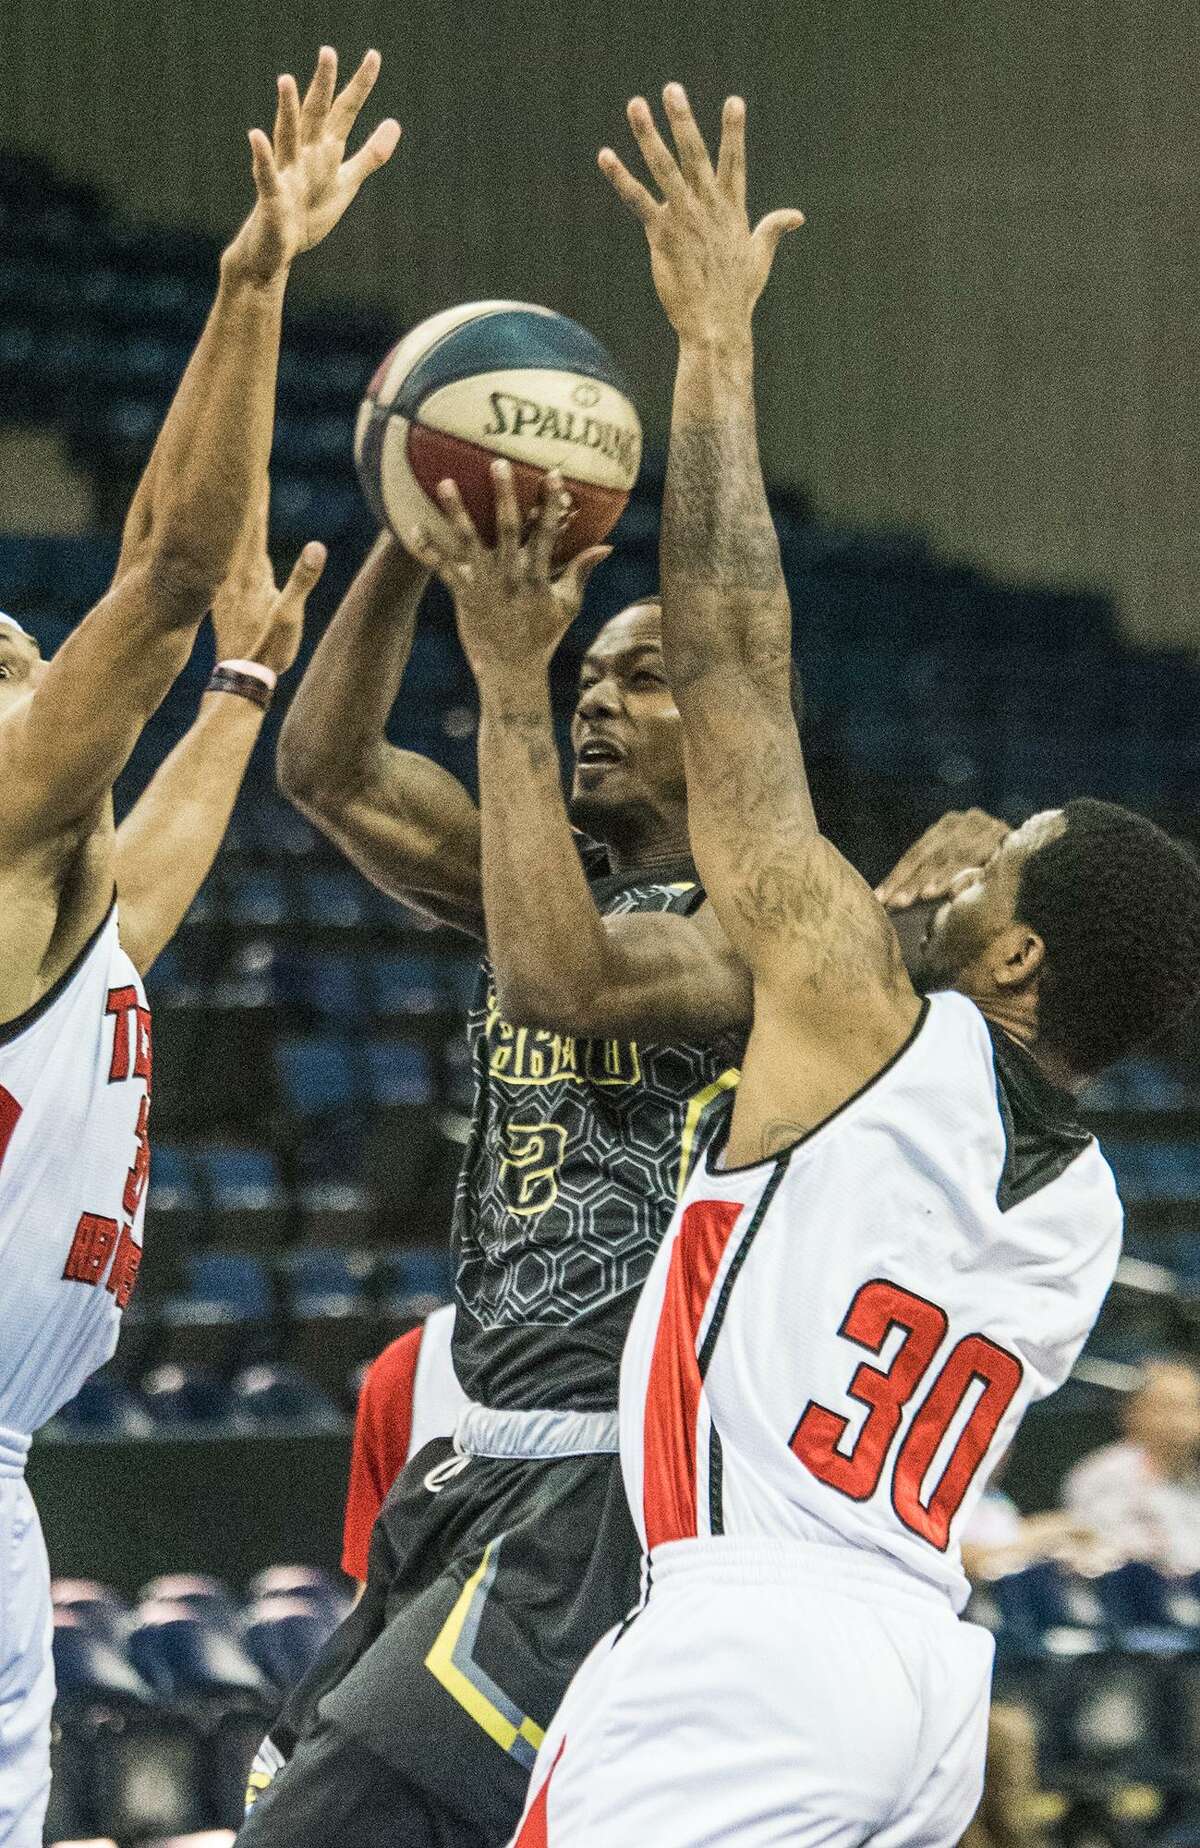 Laredo’s Donald Moore poured in a team-high 37 points as the Swarm pulled away for a 113-98 win over the Texas Red Wolves on Thursday night.